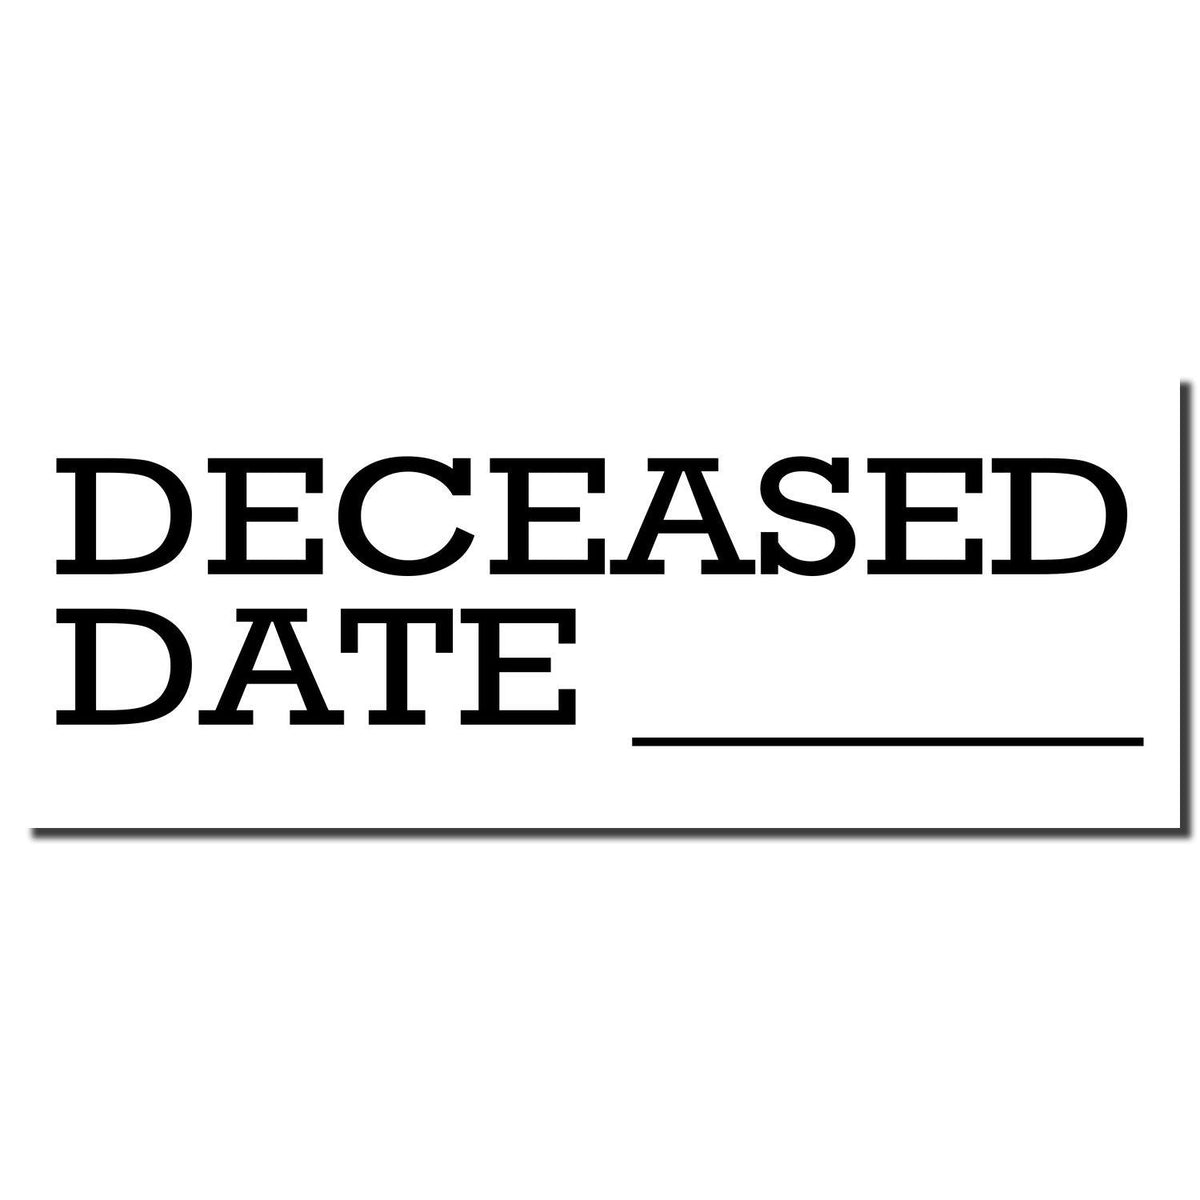 Self Inking Deceased Date Stamp - Engineer Seal Stamps - Brand_Trodat, Impression Size_Small, Stamp Type_Self-Inking Stamp, Type of Use_Medical Office